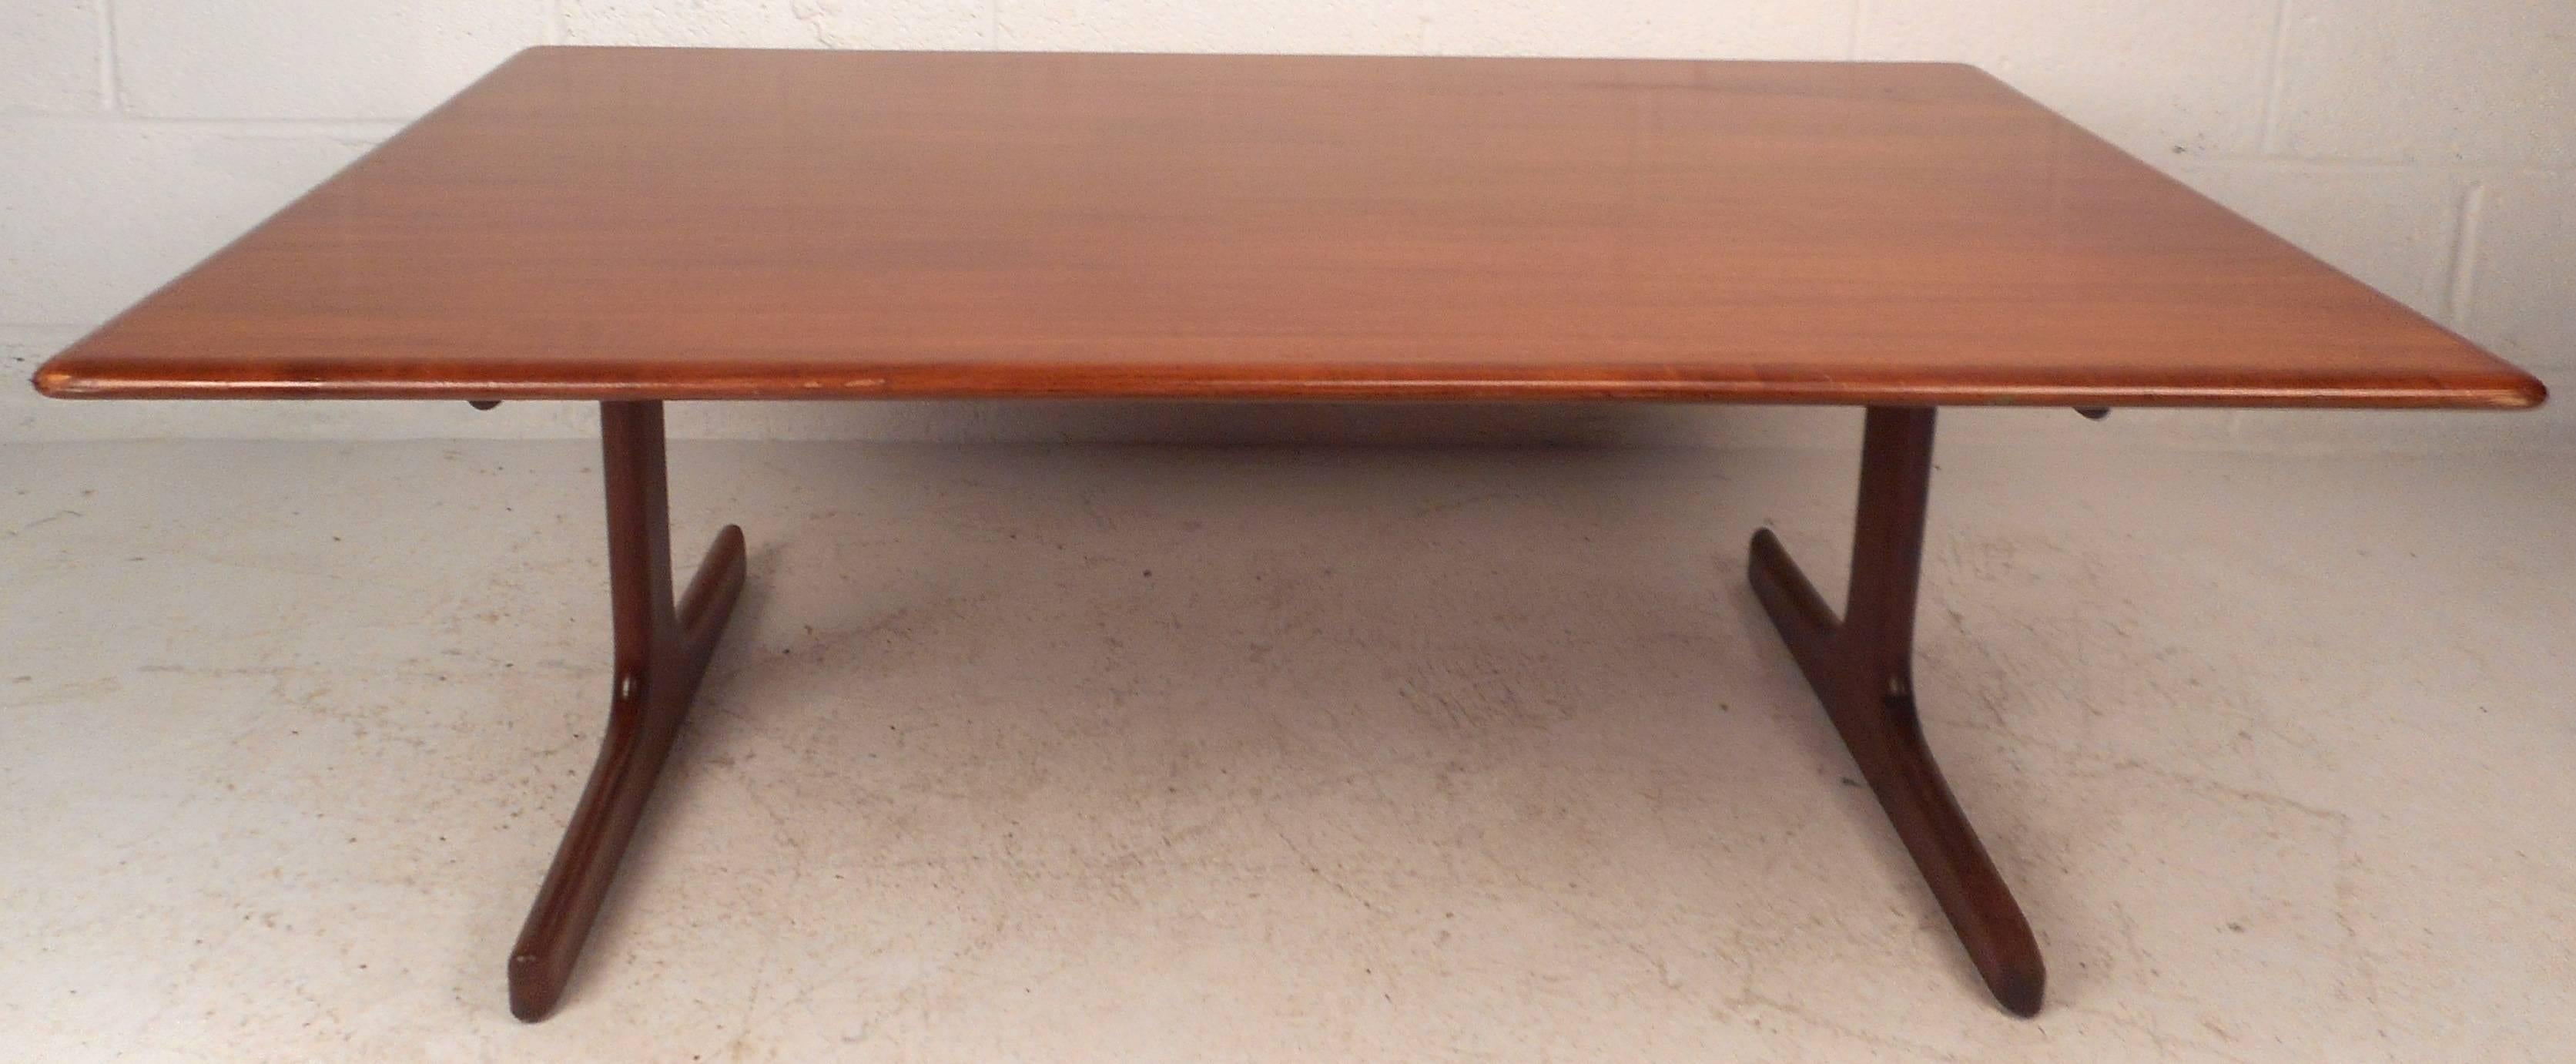 This gorgeous vintage modern coffee table features a unique base and smooth rounded edges along the top. The unusually large tabletop has beautiful teak wood grain adding to the allure. Quality construction ensures sturdiness and style in any modern